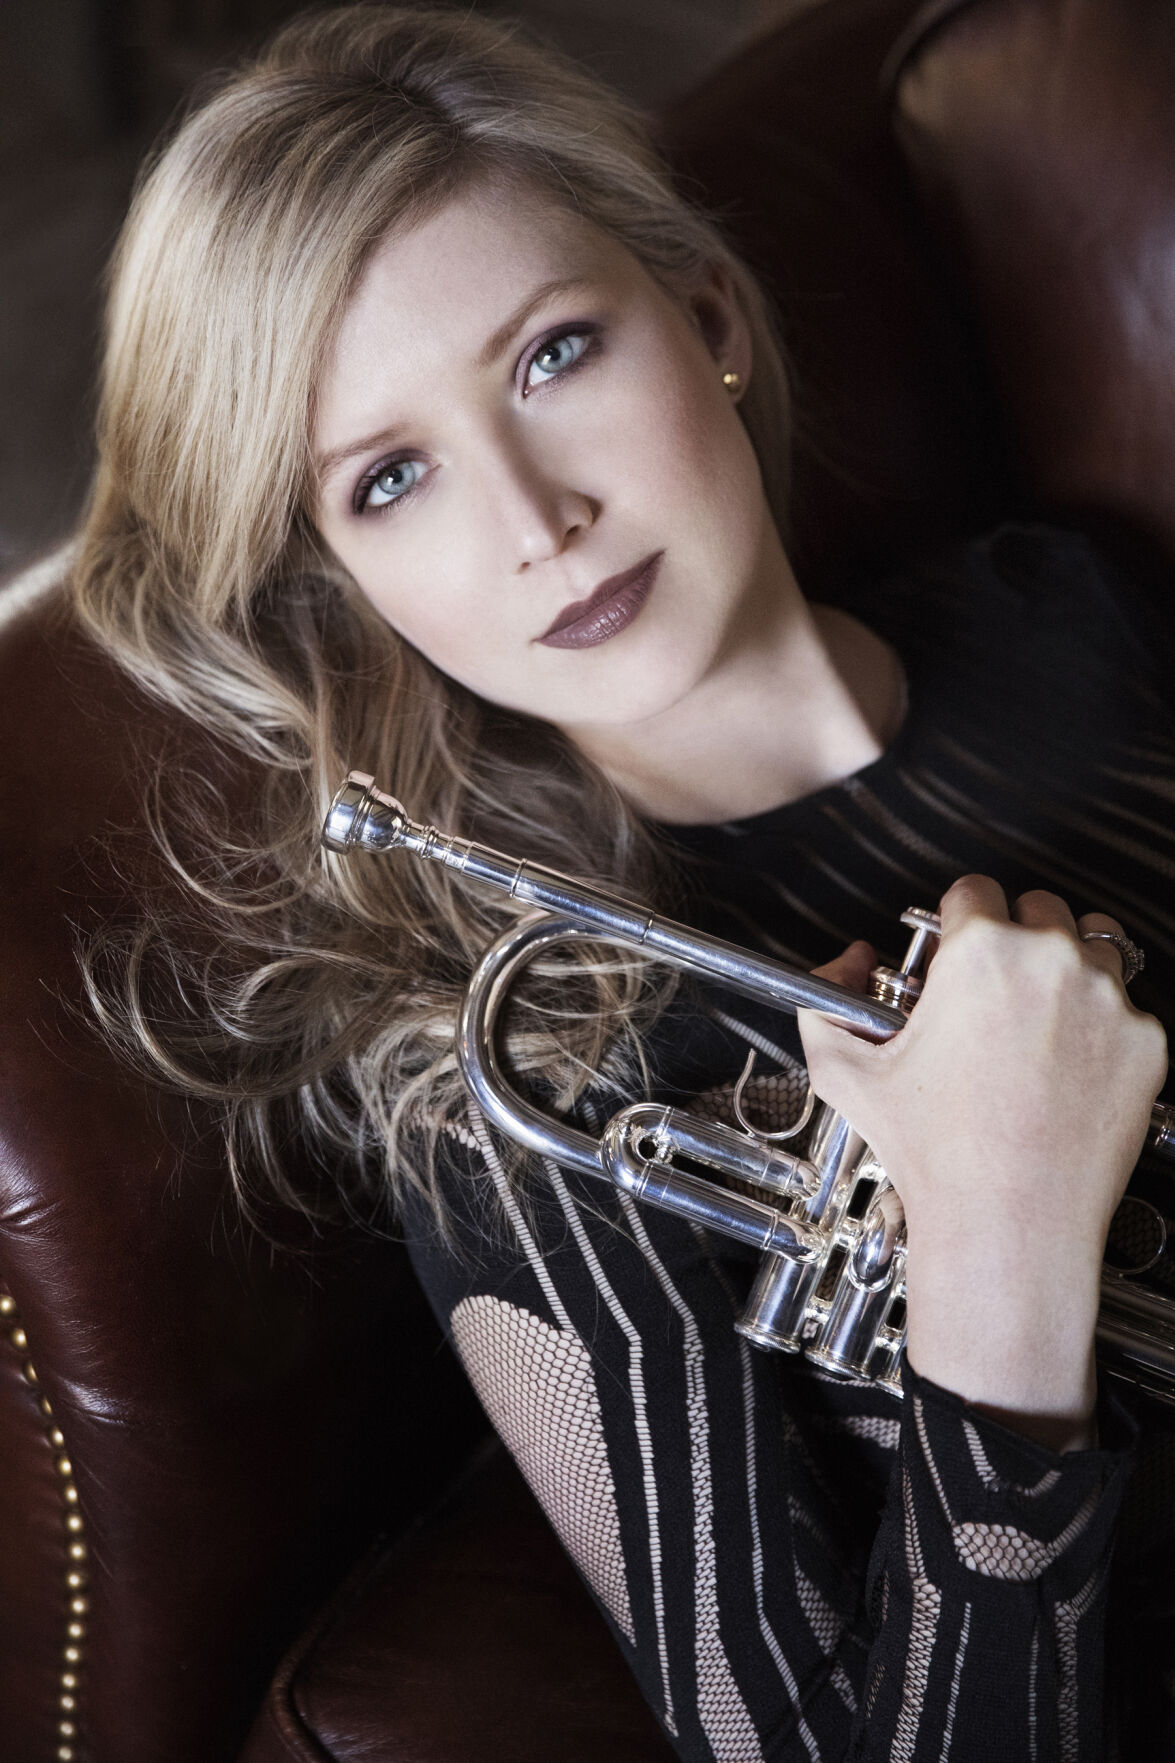 Rogue Spotlight: All about that brass — Trumpet virtuoso Mary